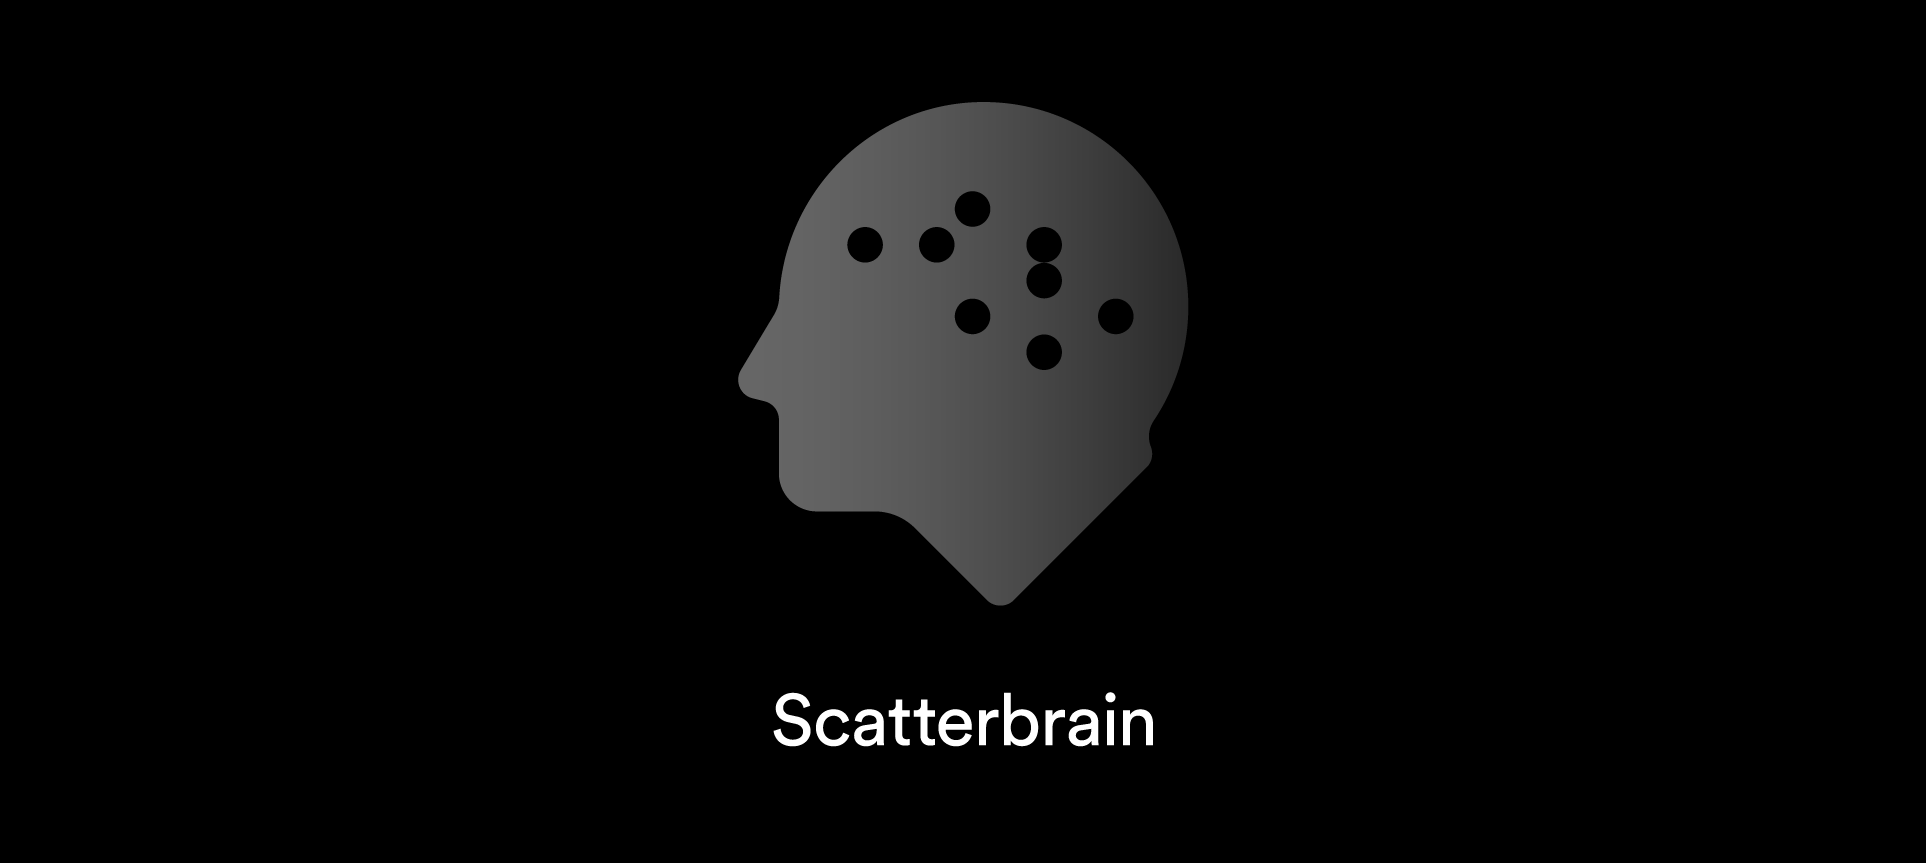 Head with scattered circles icon and 'Scatterbrain' underneath it